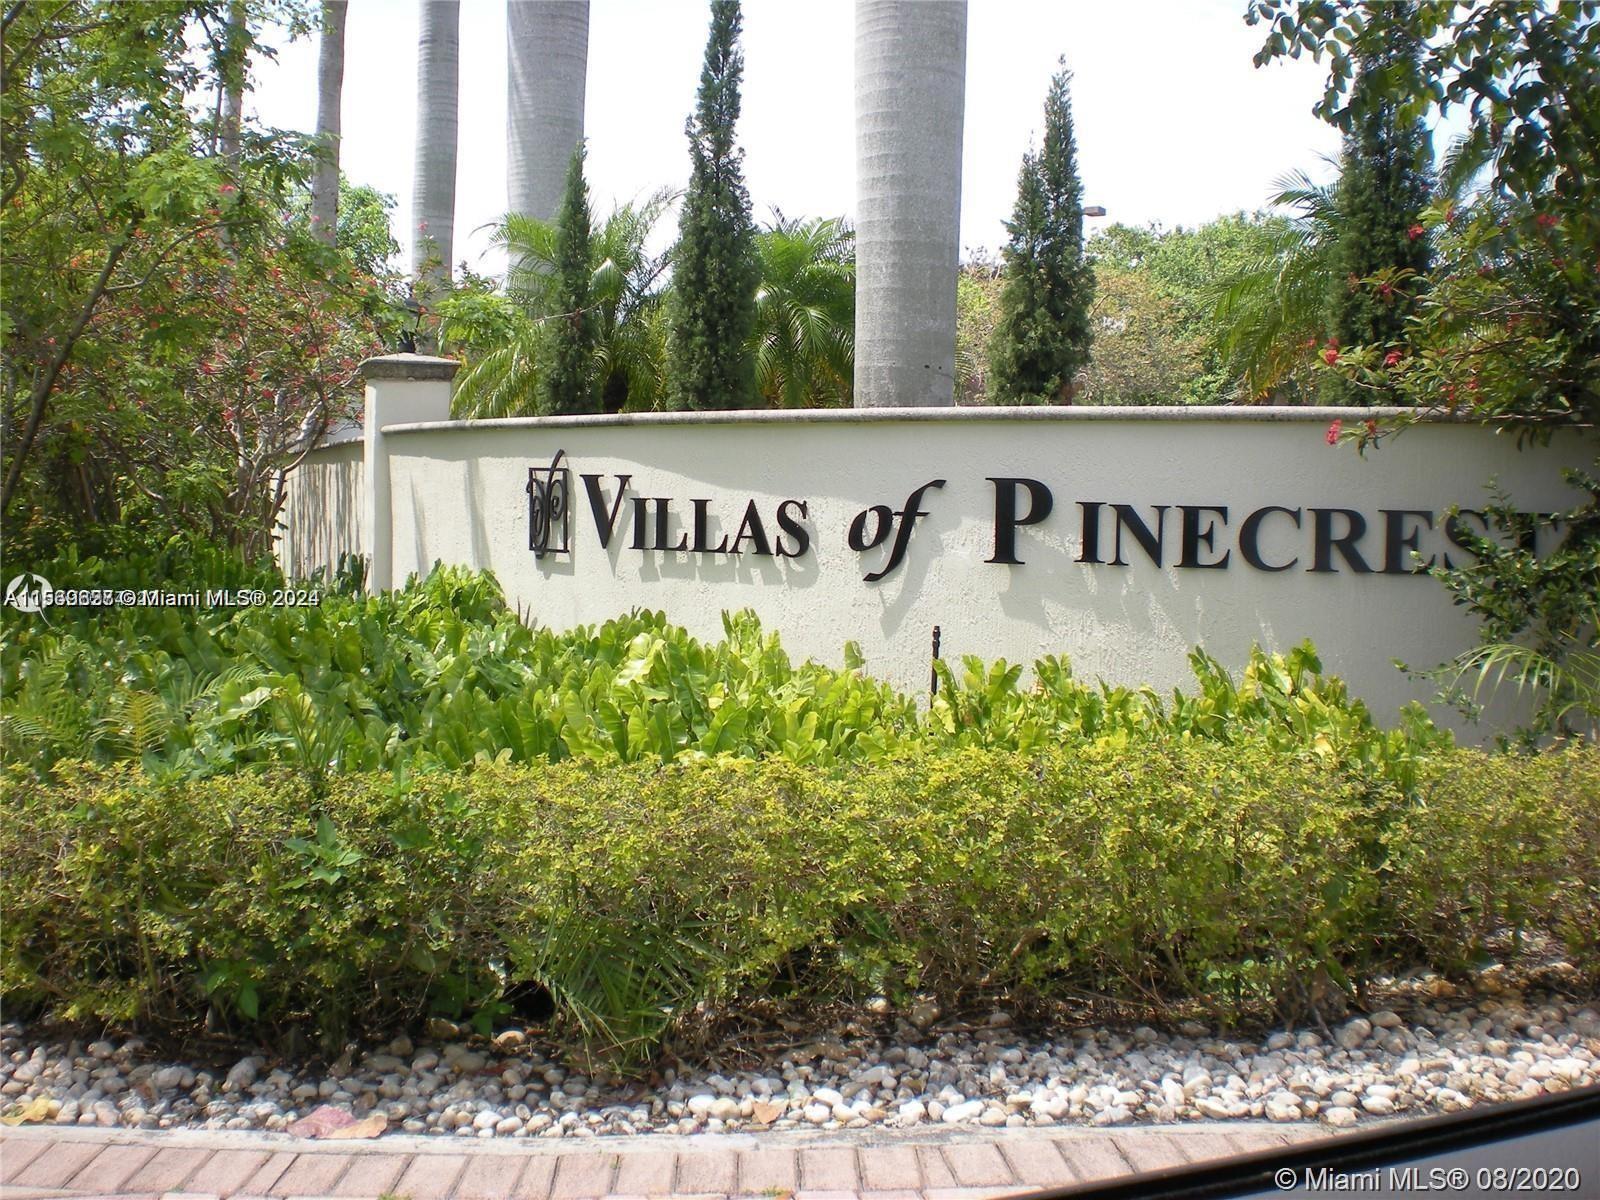 6713 N Kendall Dr 607, Pinecrest, Florida 33156, 1 Bedroom Bedrooms, 1 Room Rooms,1 BathroomBathrooms,Residential,For Sale,6713 N Kendall Dr 607,A11569627